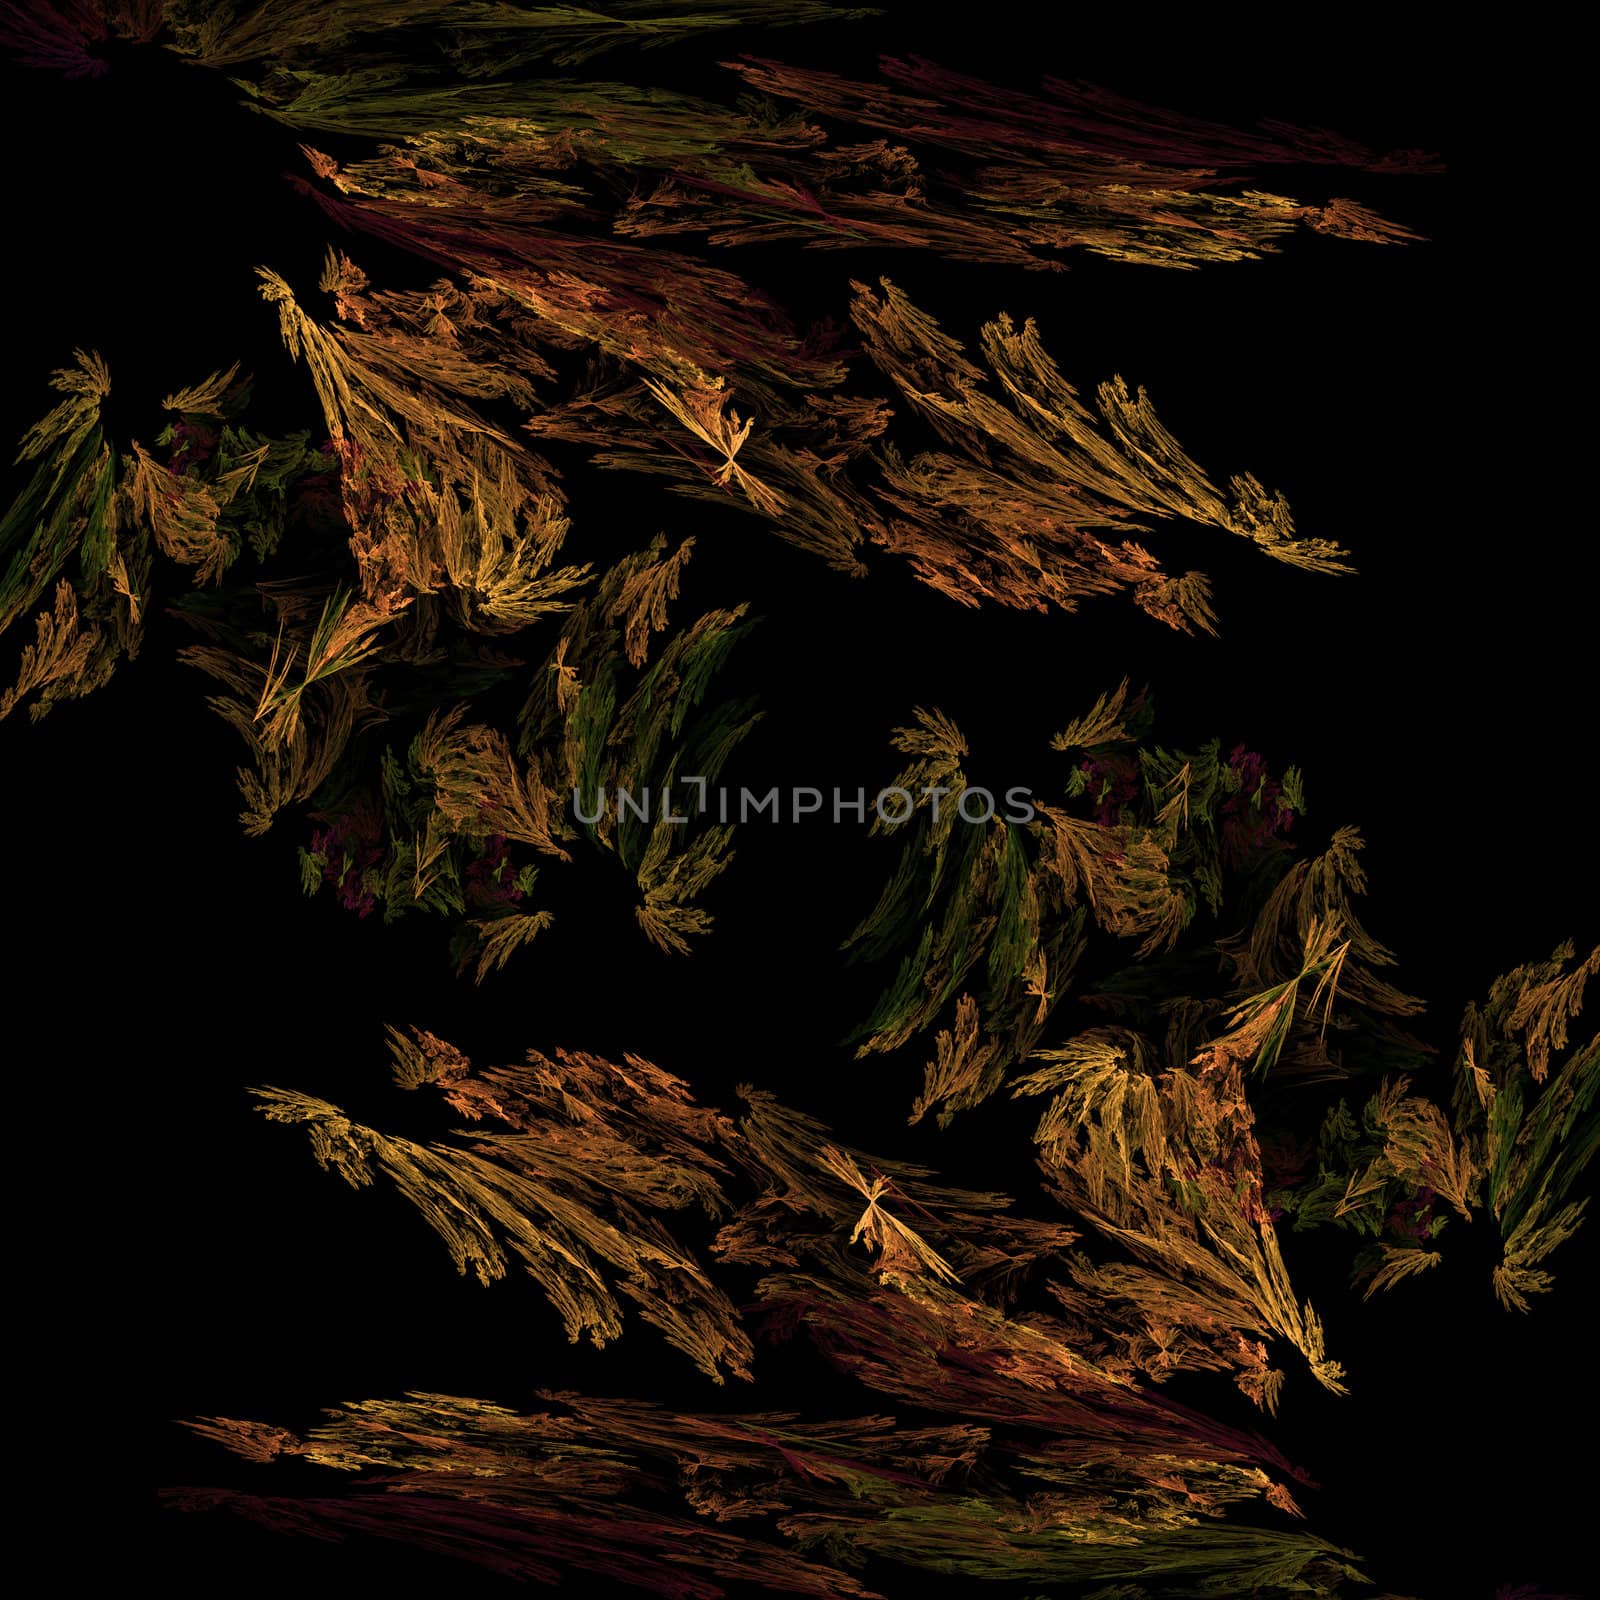 Abstract fractal design in shades of brown and green